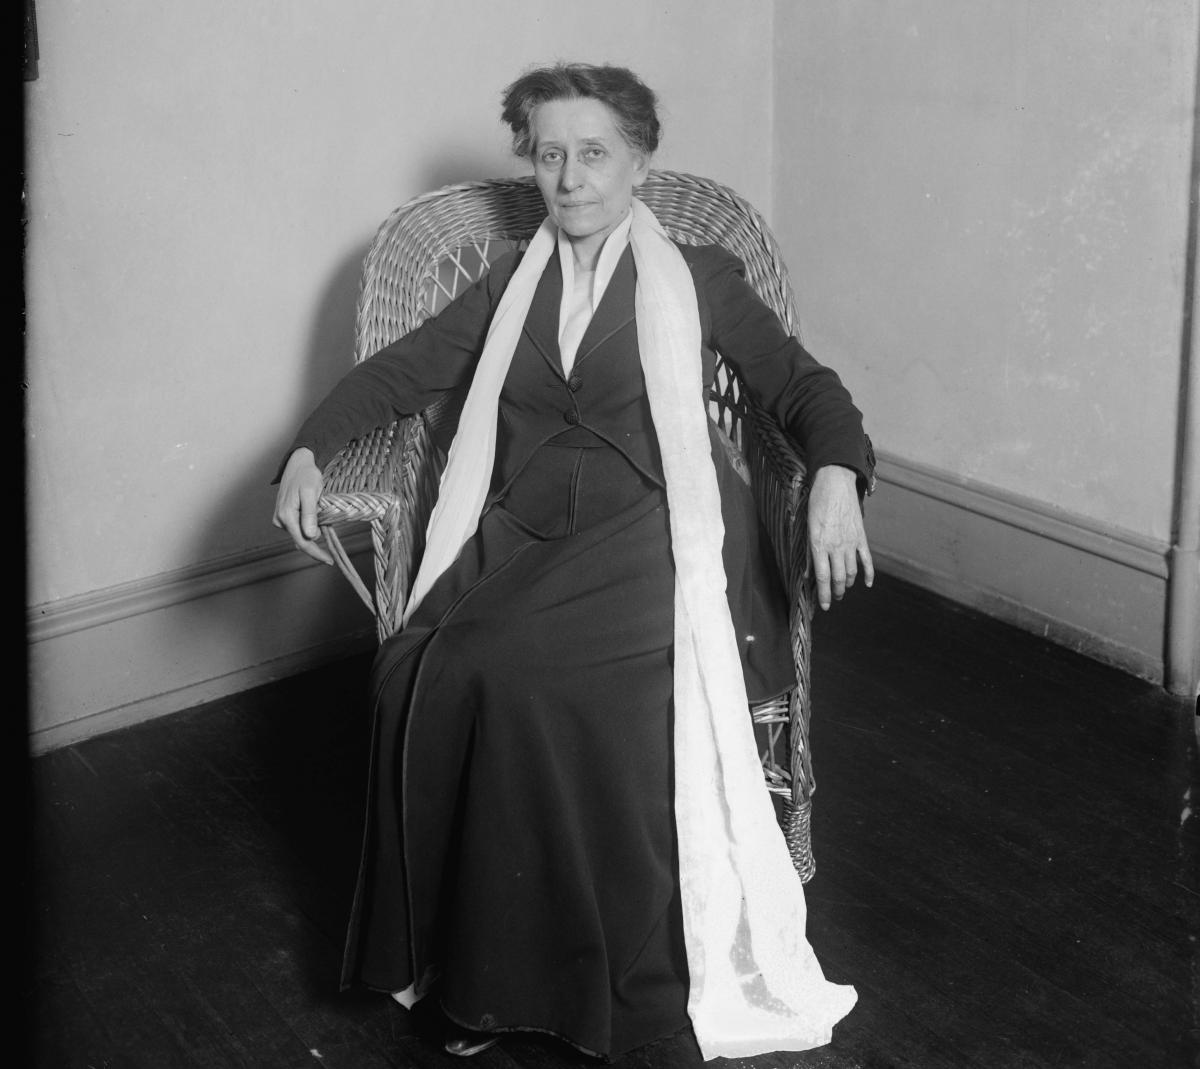 Adelaide Johnson, looking every bit the mature artist, seated in a wicker chair and draped in a long white scarf